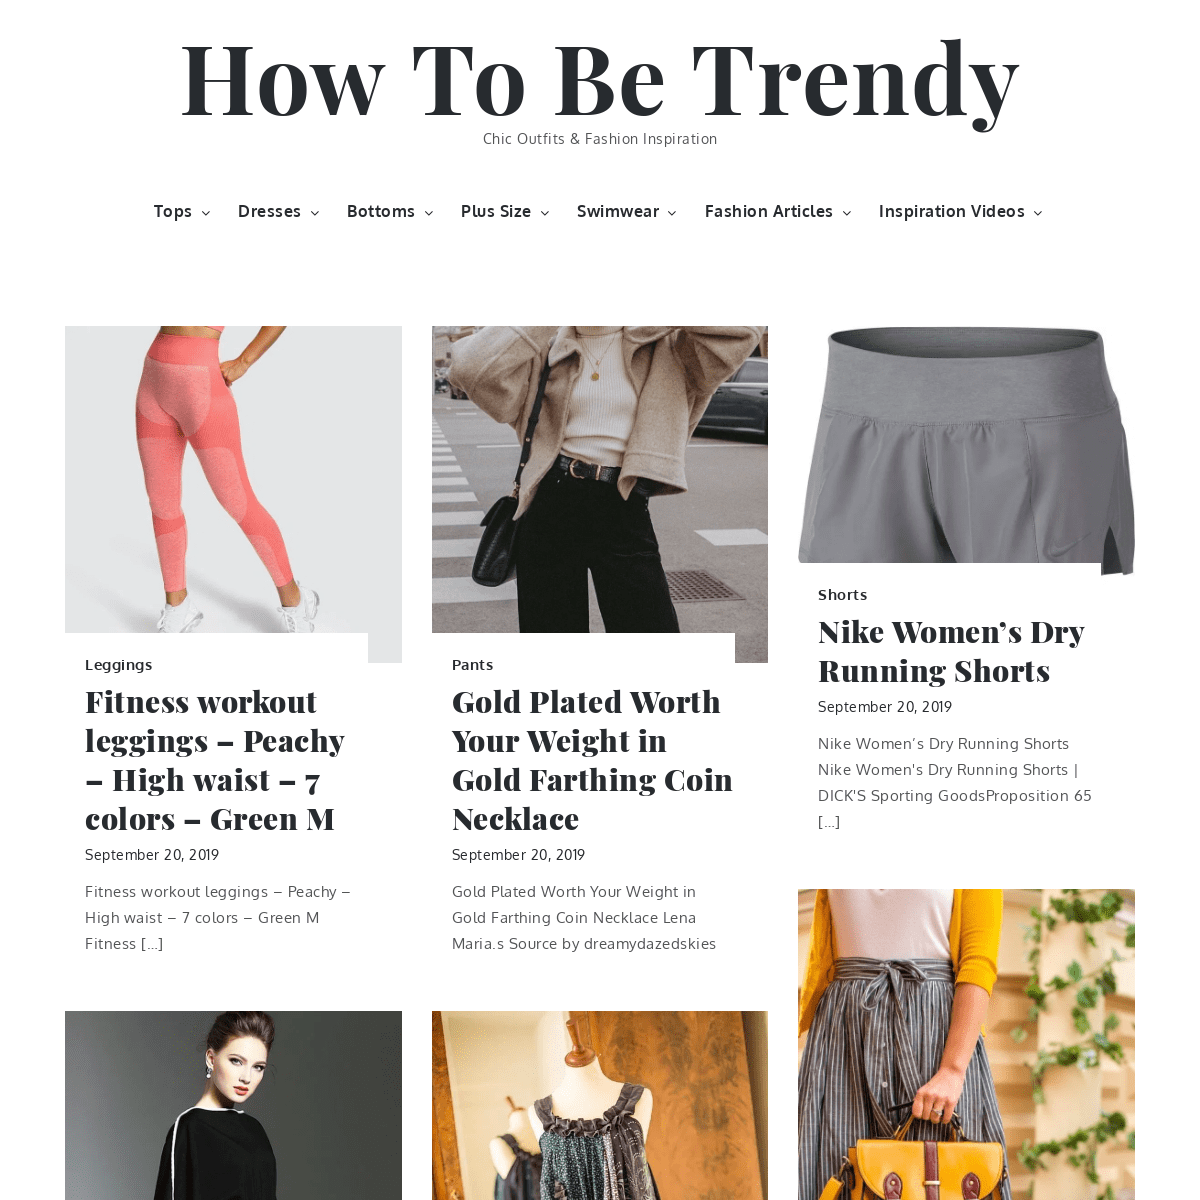 How To Be Trendy - Chic Outfits & Fashion Inspiration